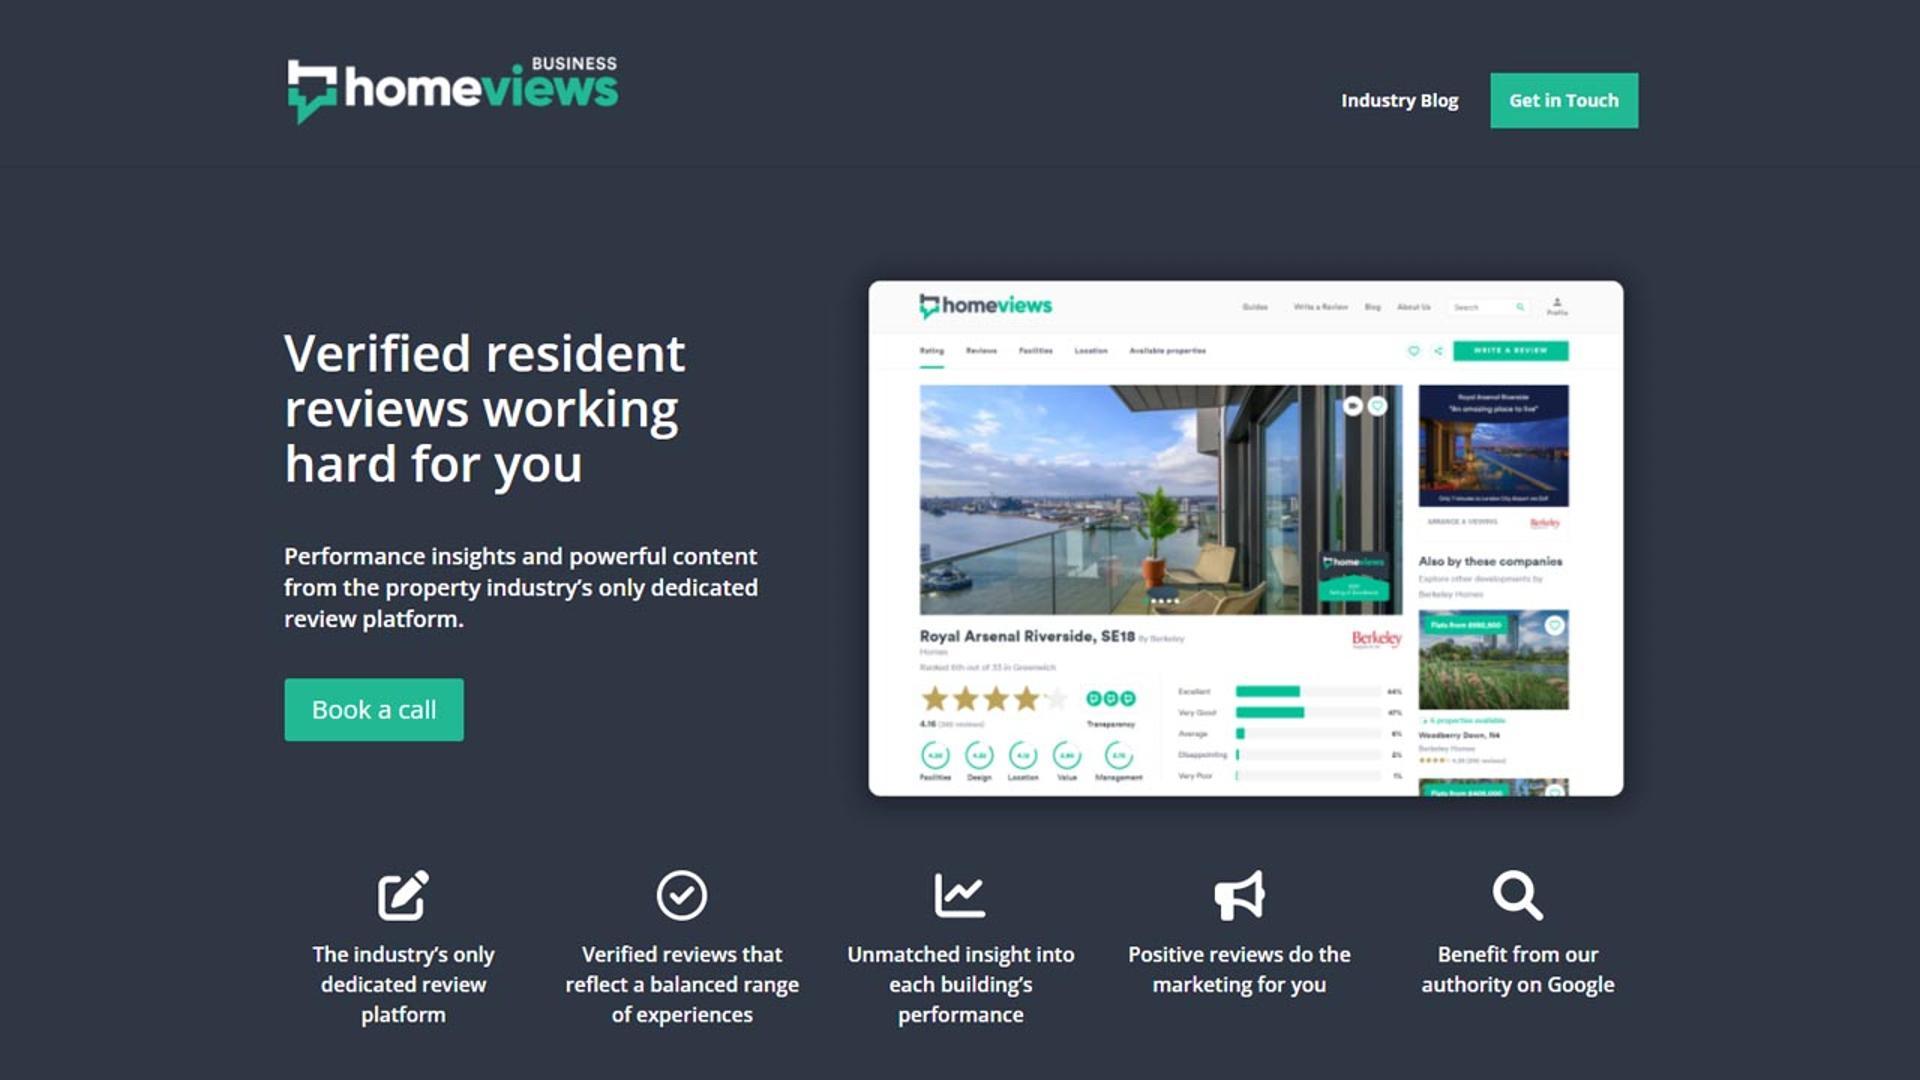 Rightmove acquires property information platform in £8m deal